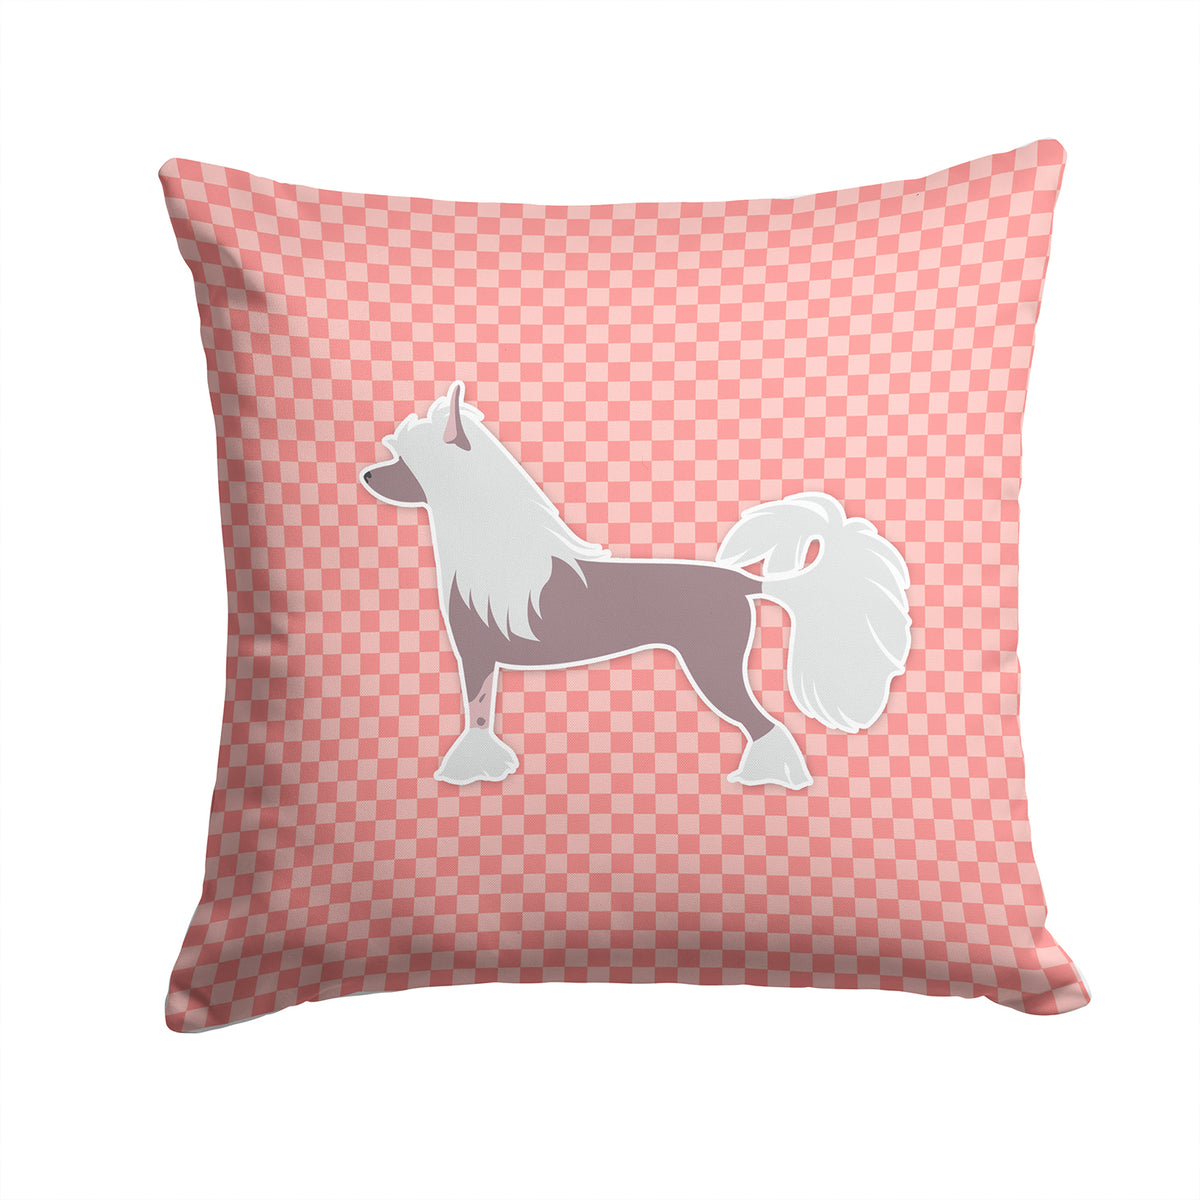 Chinese Crested Checkerboard Pink Fabric Decorative Pillow BB3643PW1414 - the-store.com